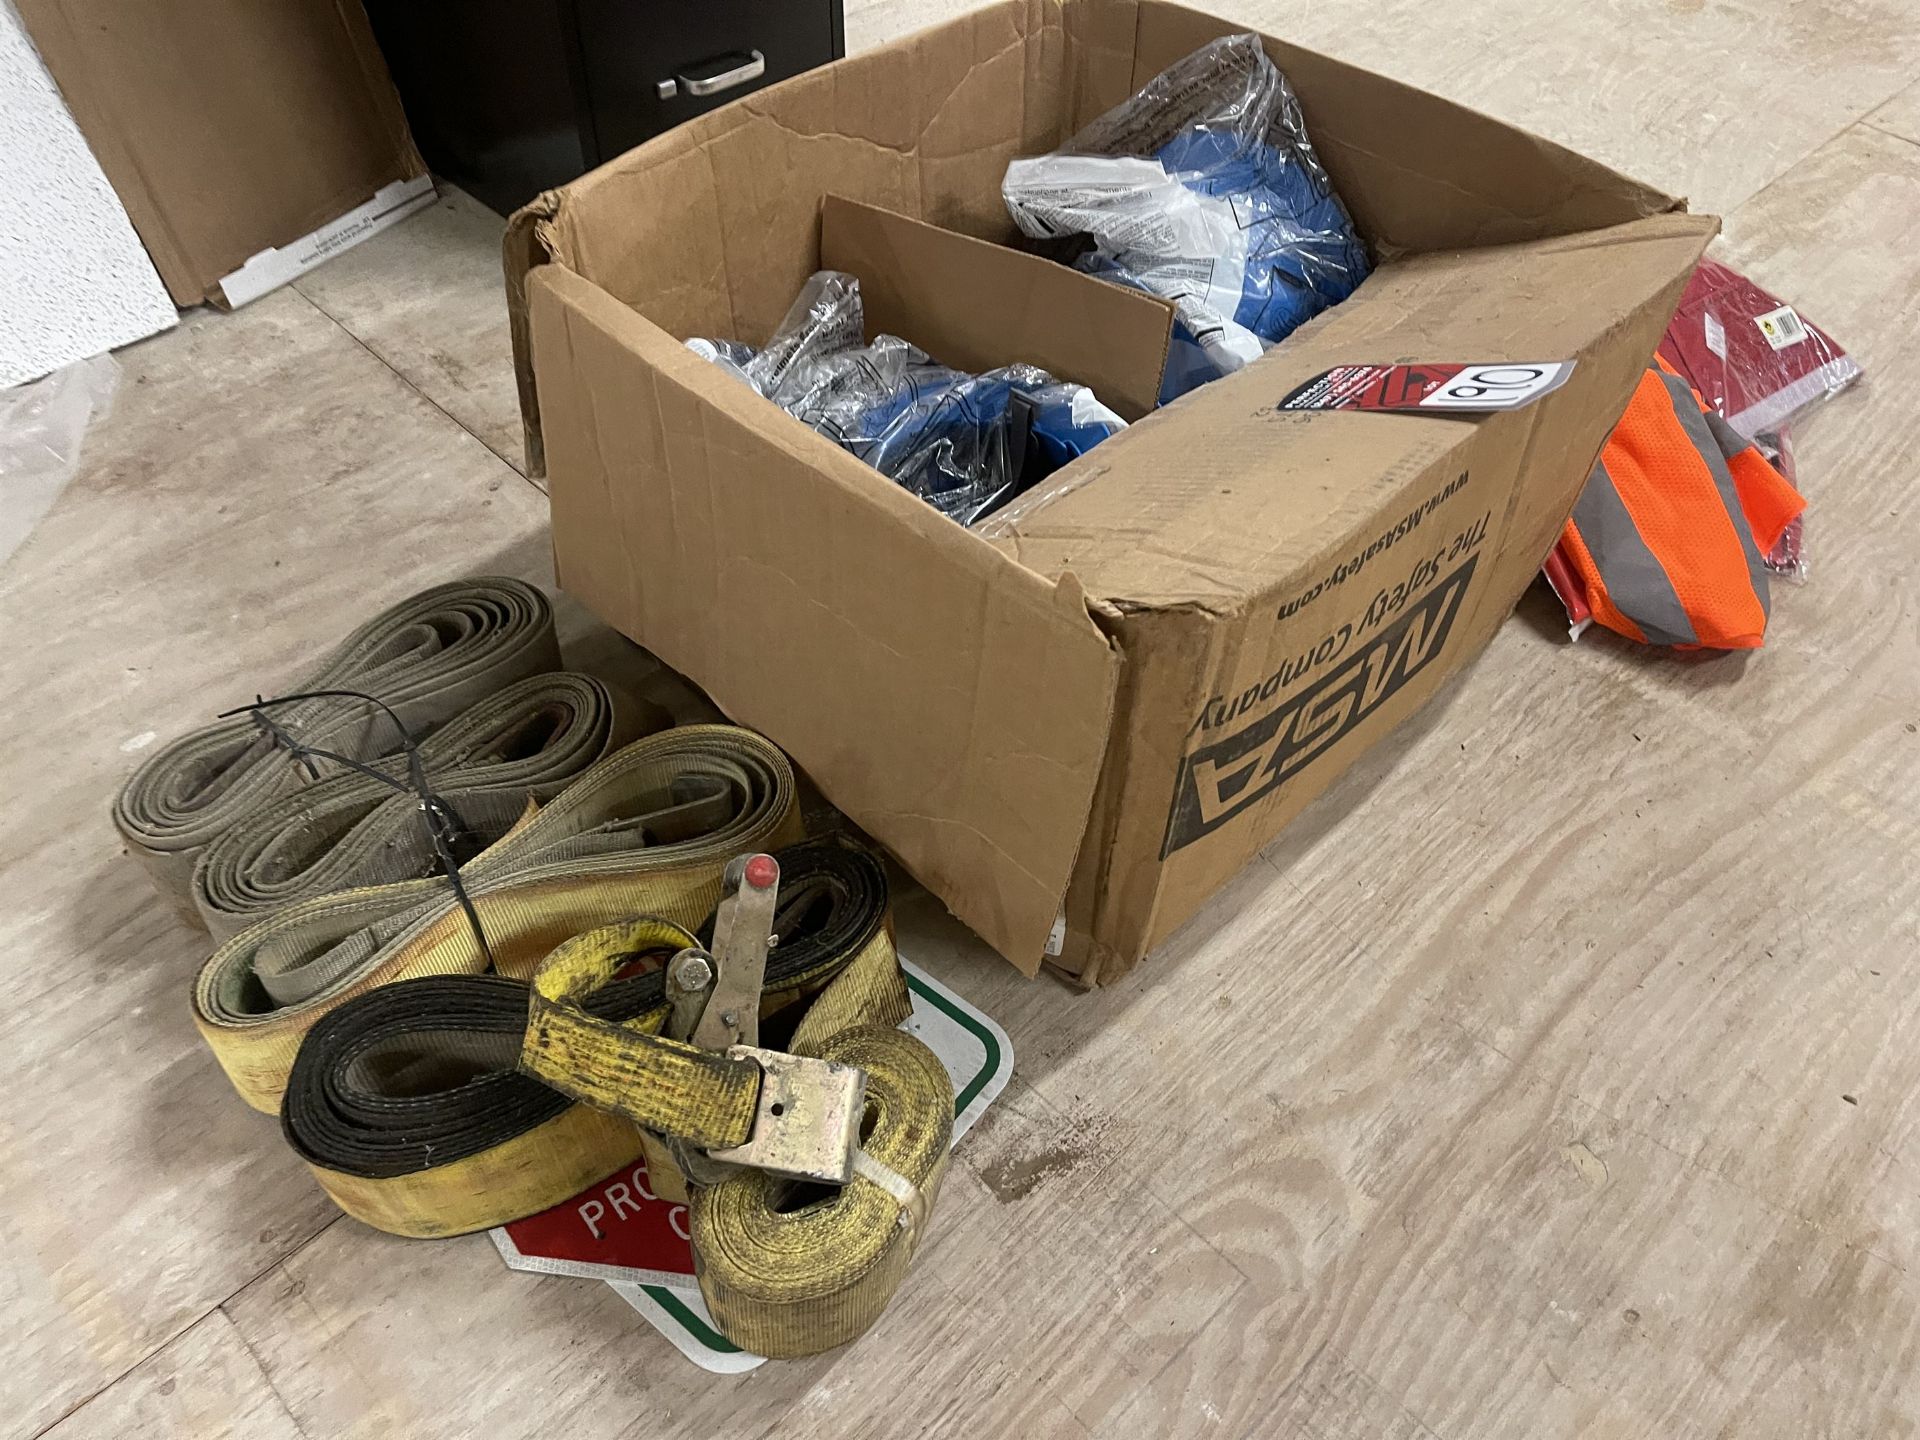 Lot Comprising Hard Hats, Work Vests, and Nylon Straps